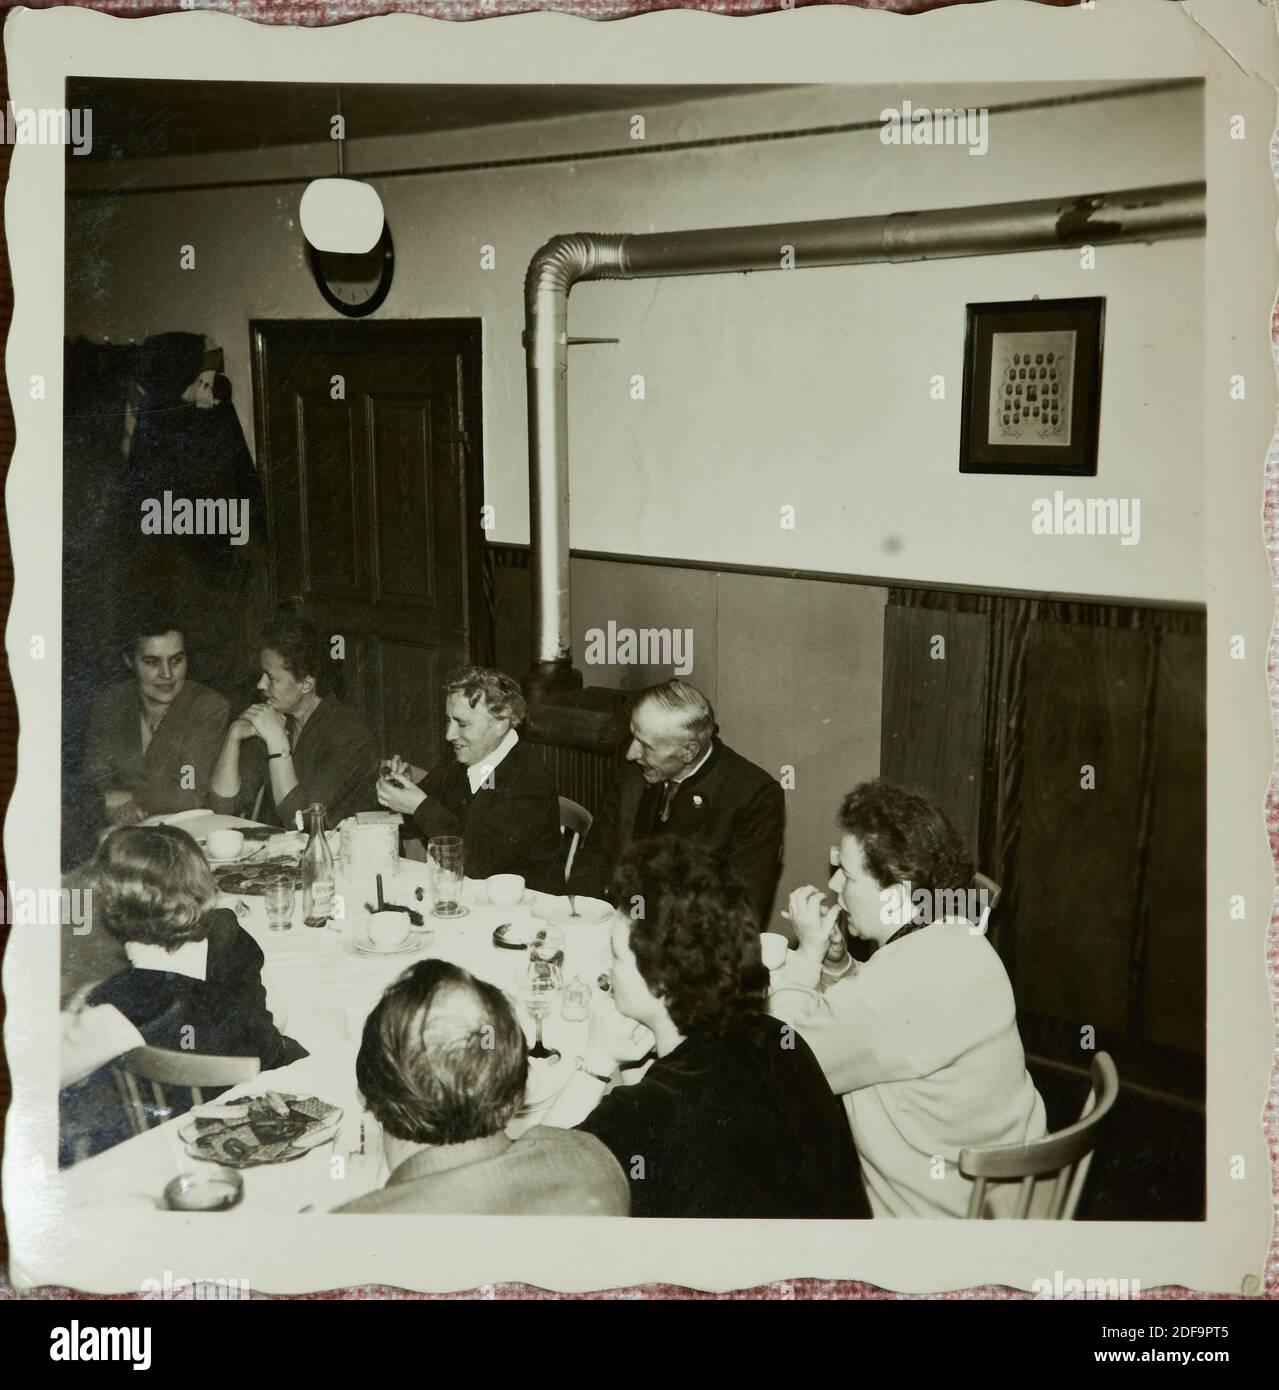 Historical Photo:  Group of people at a restaurant Hotel Alte Post in Biessenhofen, Bavaria 1958 Reproduction in Marktoberdorf, Germany, October 26, 2020.  © Peter Schatz / Alamy Stock Photos Stock Photo